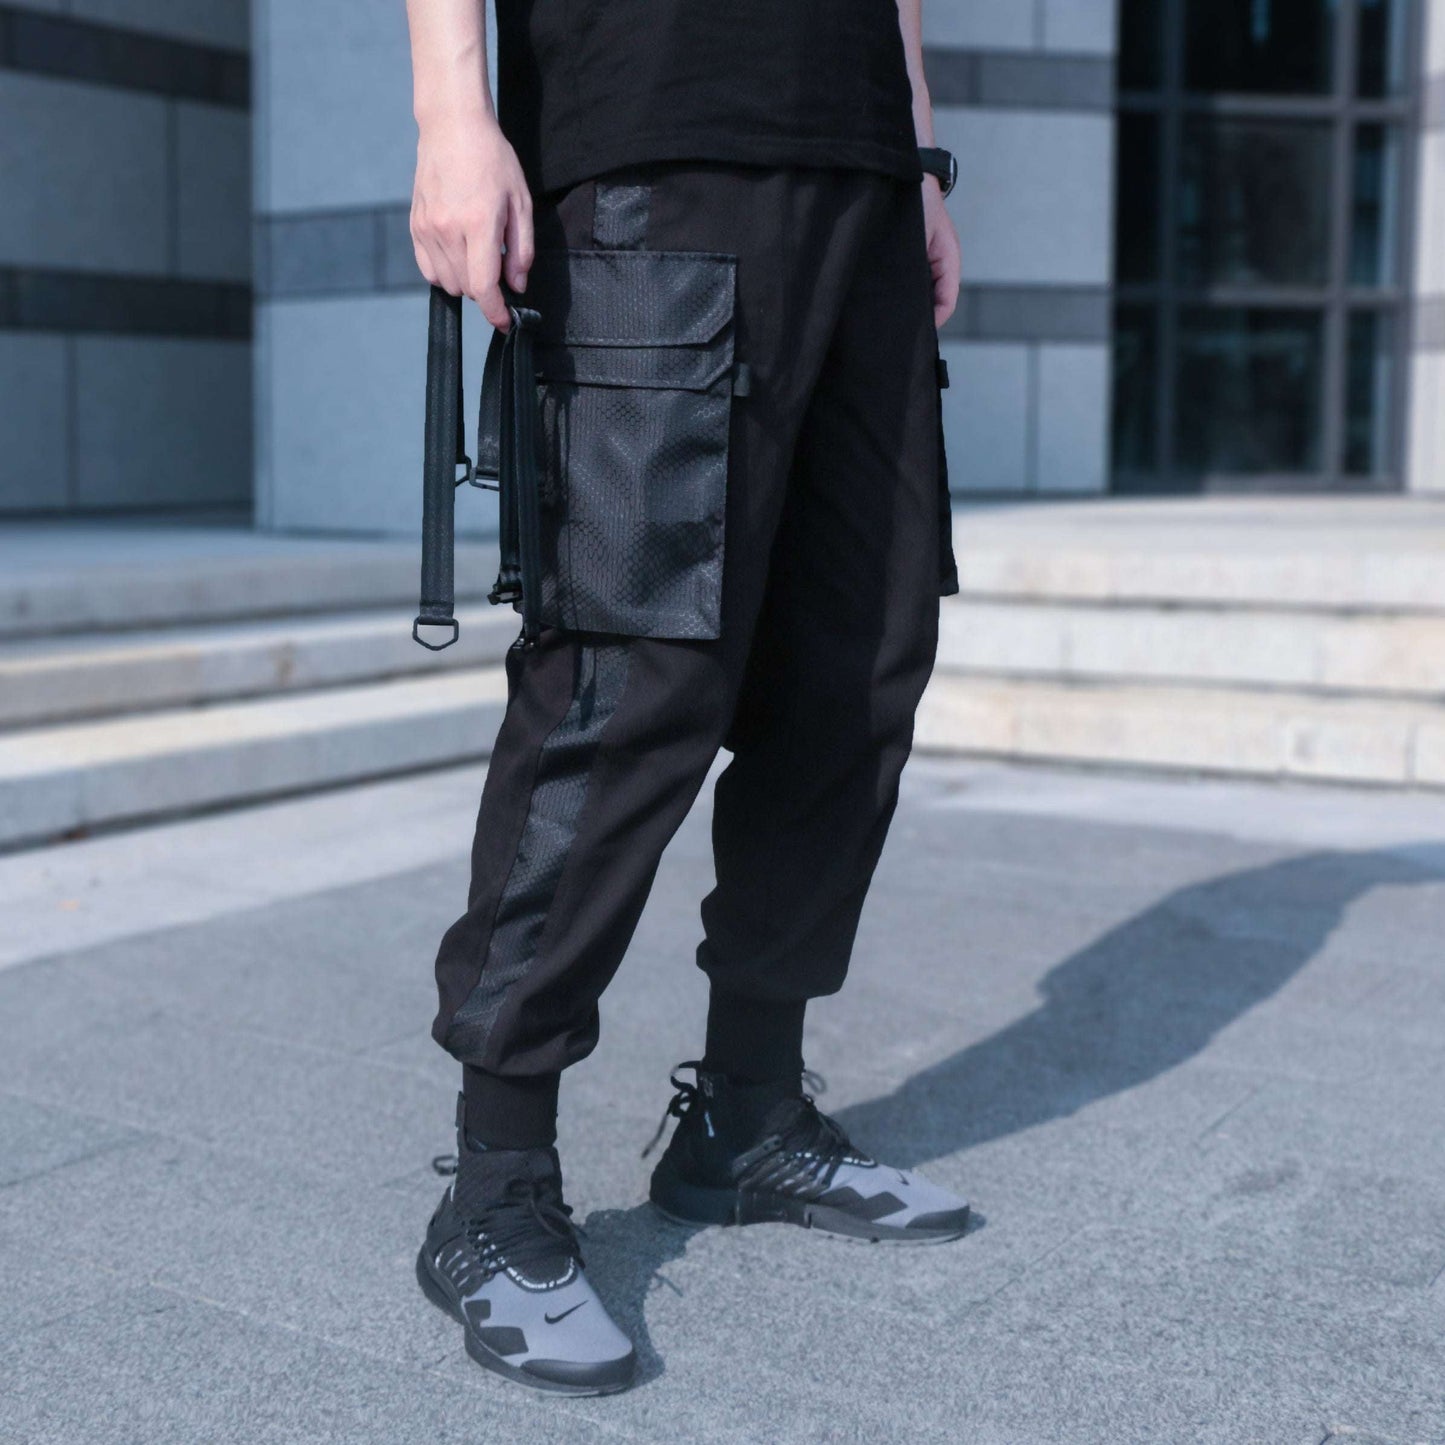 Durable Splicing Trousers, Functional Paratrooper Pants, Tactical Work Leggings - available at Sparq Mart